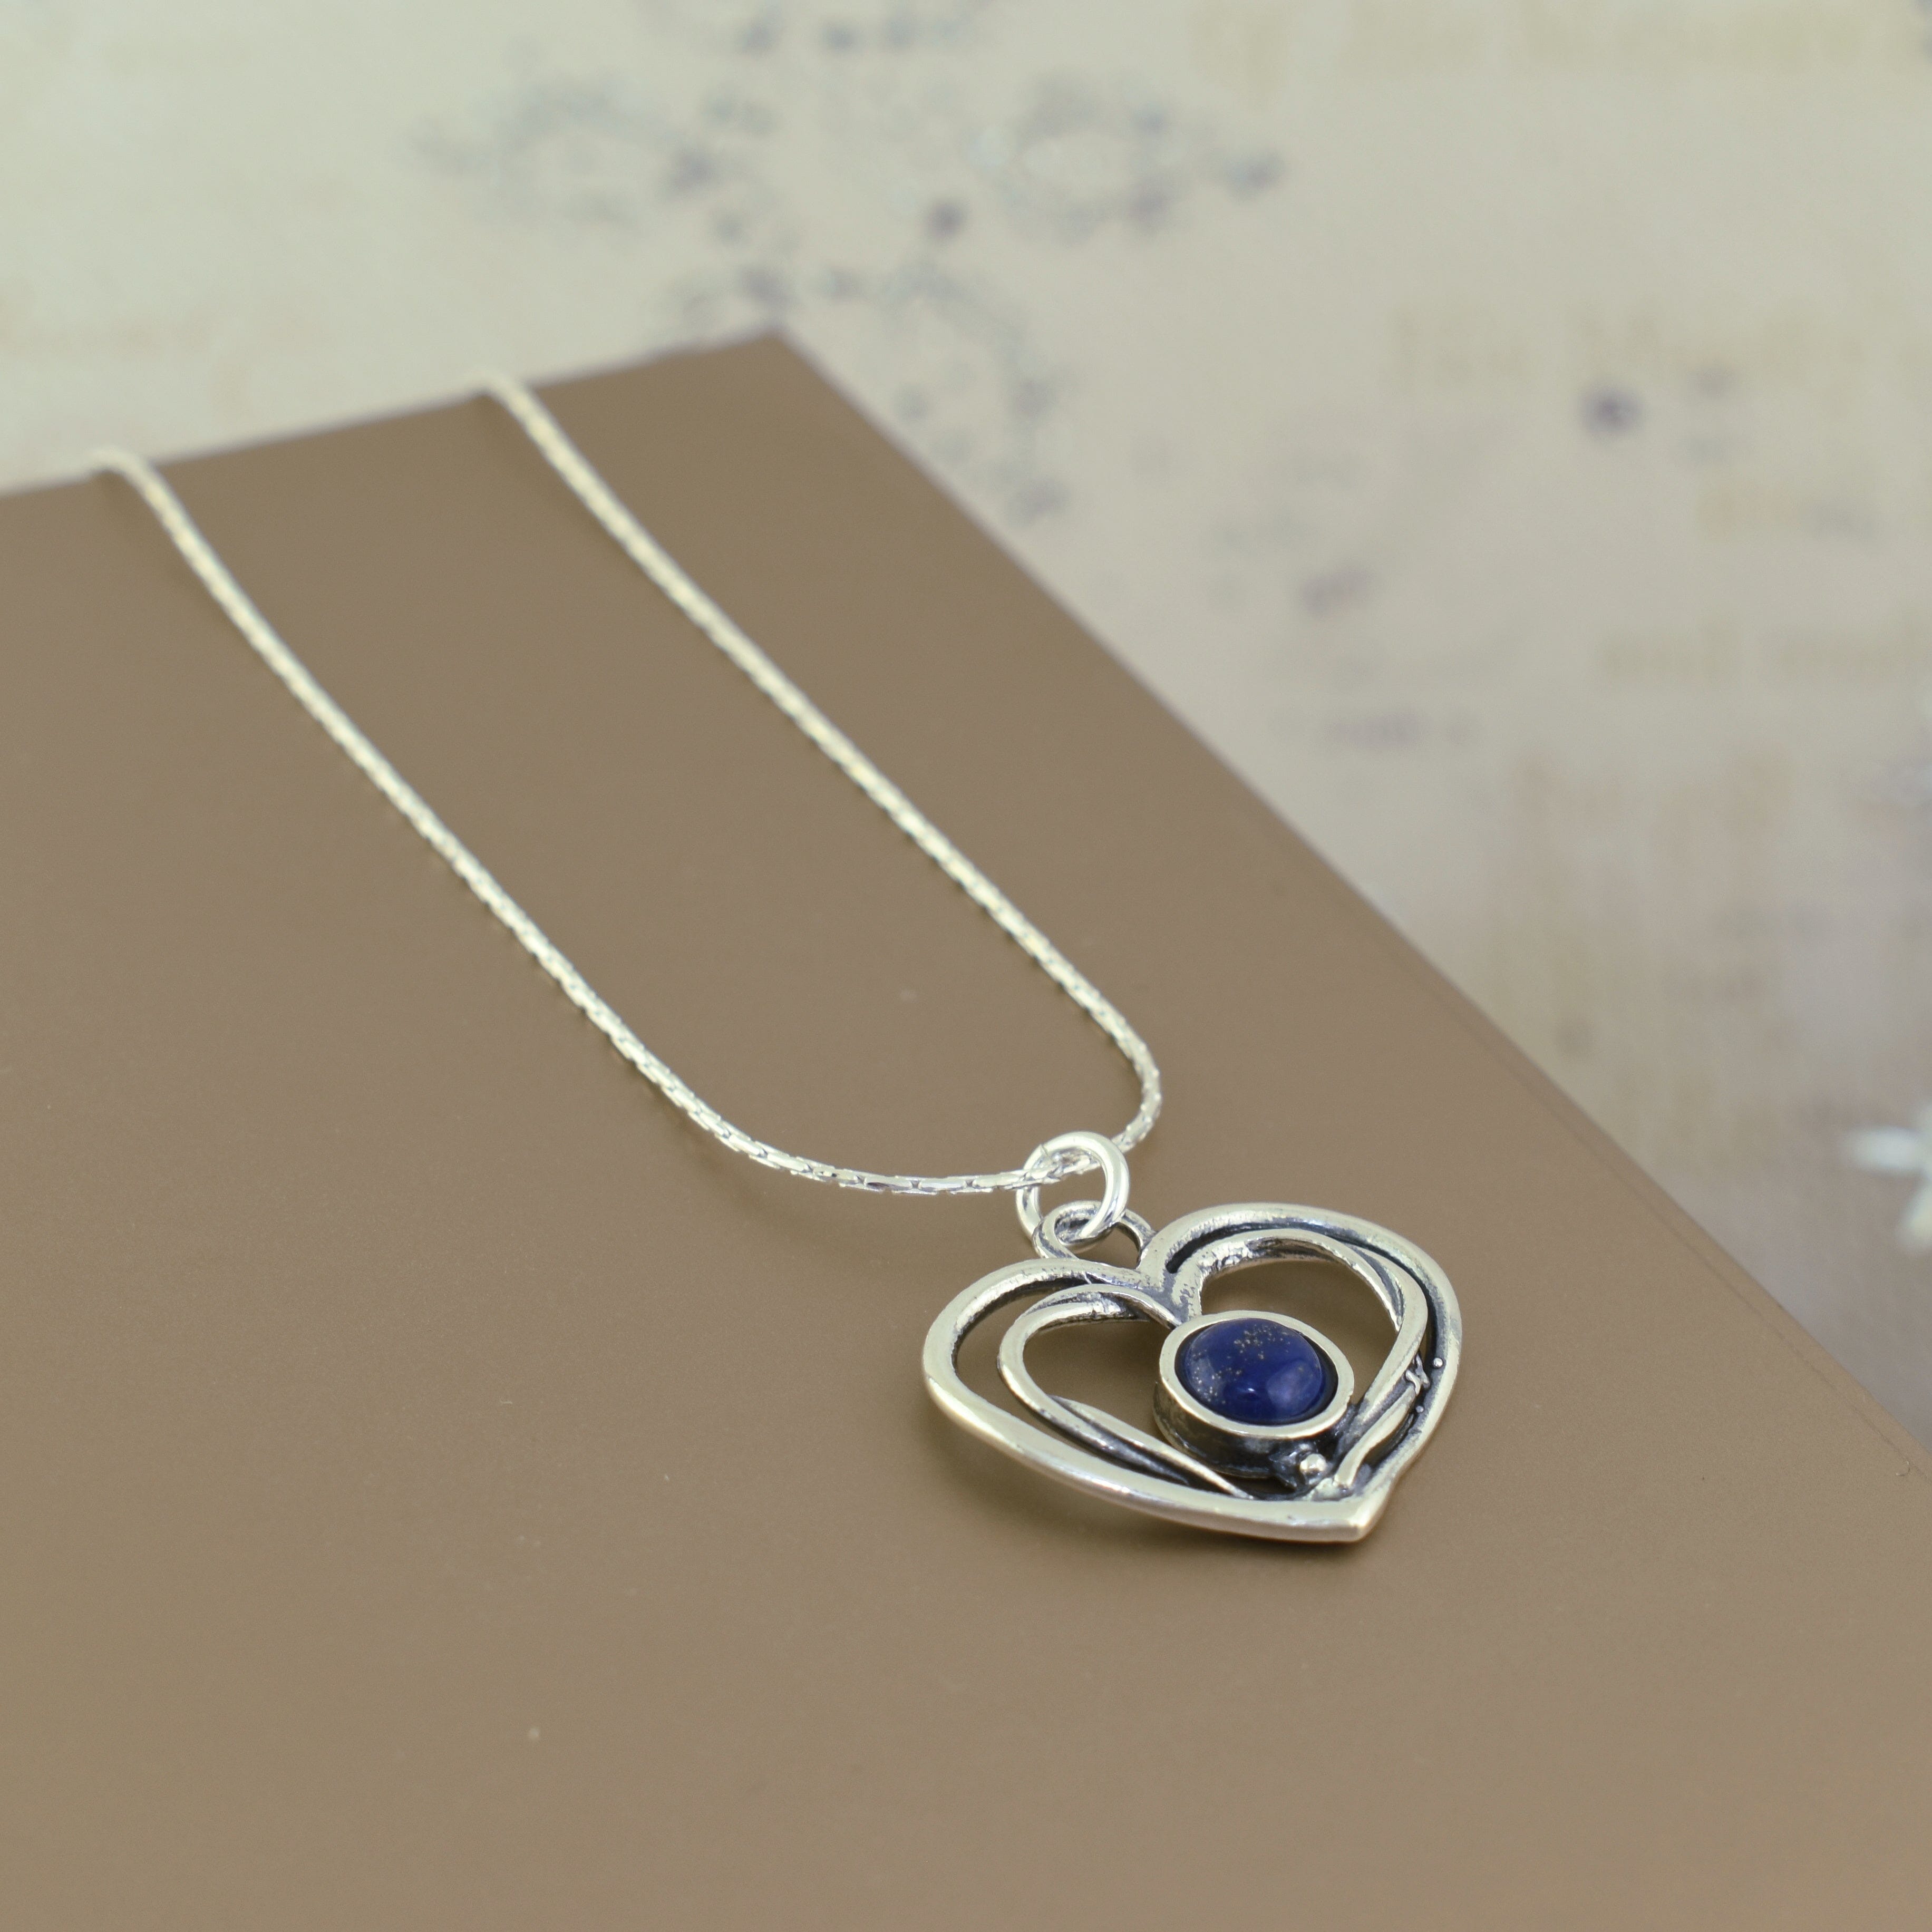 .925 sterling silver heart necklace with blue lapis stone